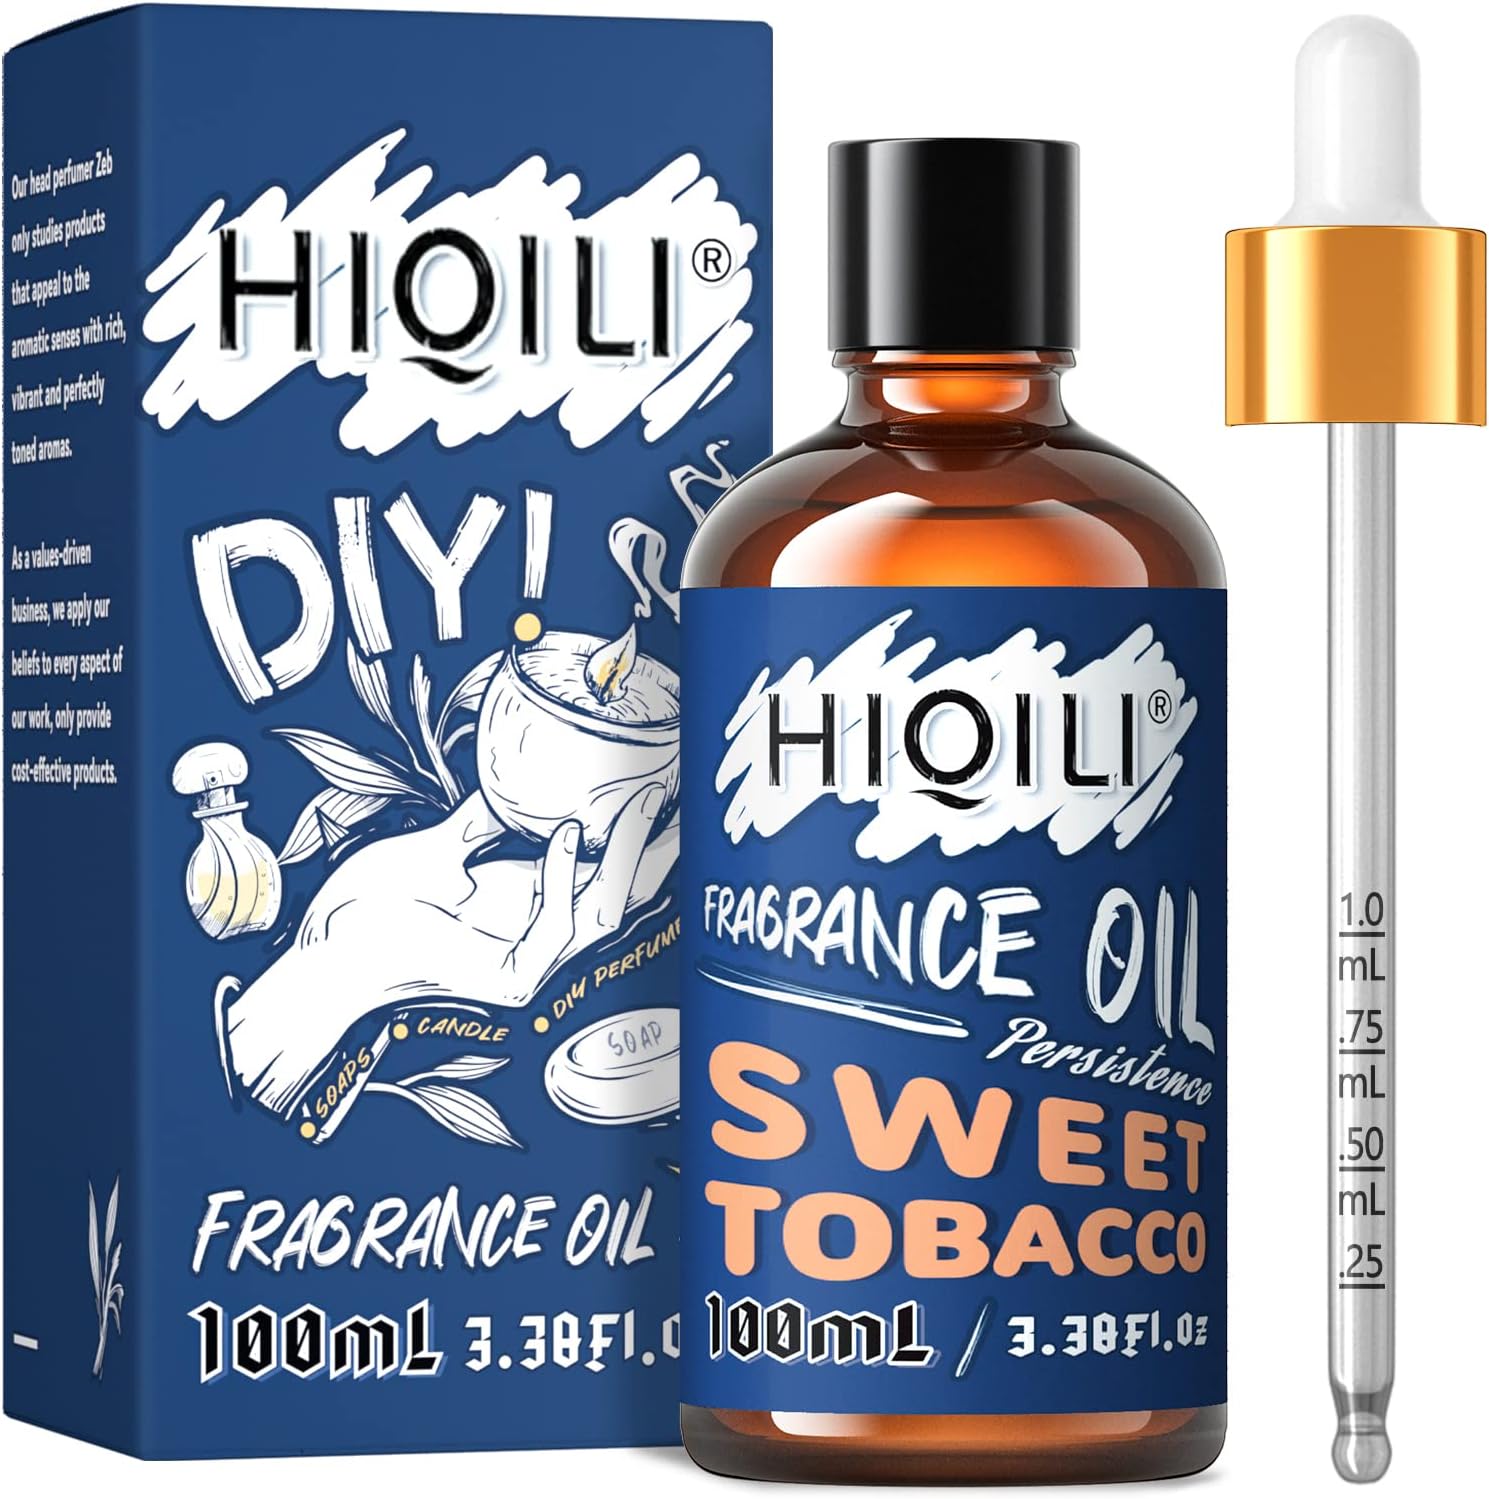 HIQILI Sweet Tobacco Fragrance Oil 100ml, Essential Oils for Diffuser Soap Slime Candle Making, Scented Oil for Car Freshies & Home Aromatherapy, 3.38 Fl Oz, Christmas Gifts for Women Men